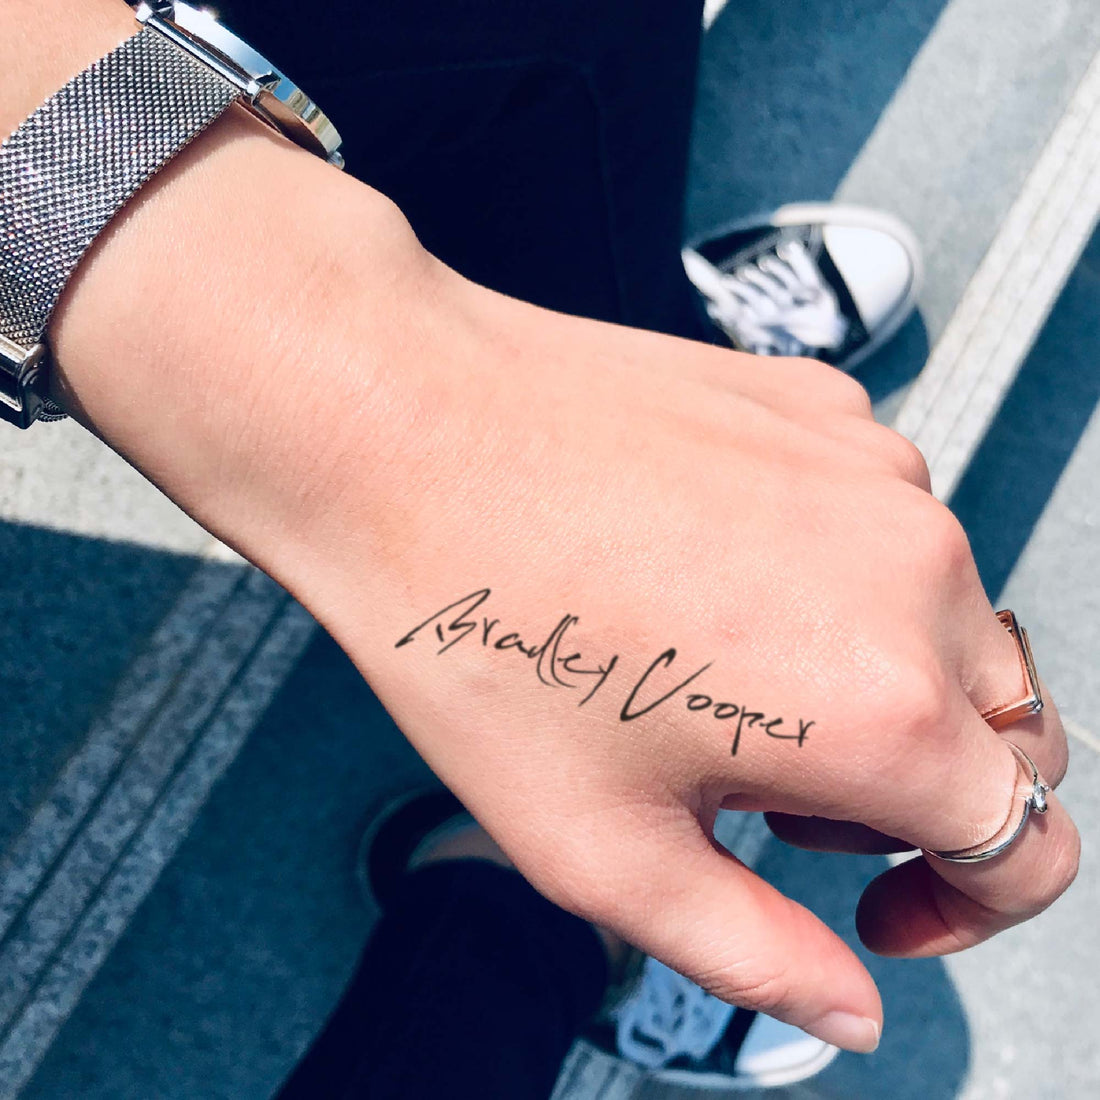 Bradley Cooper custom temporary tattoo sticker design idea inspiration meanings removal arm wrist hand words font name signature calligraphy lyrics tour concert outfits merch accessory gift souvenir costumes wear dress up code